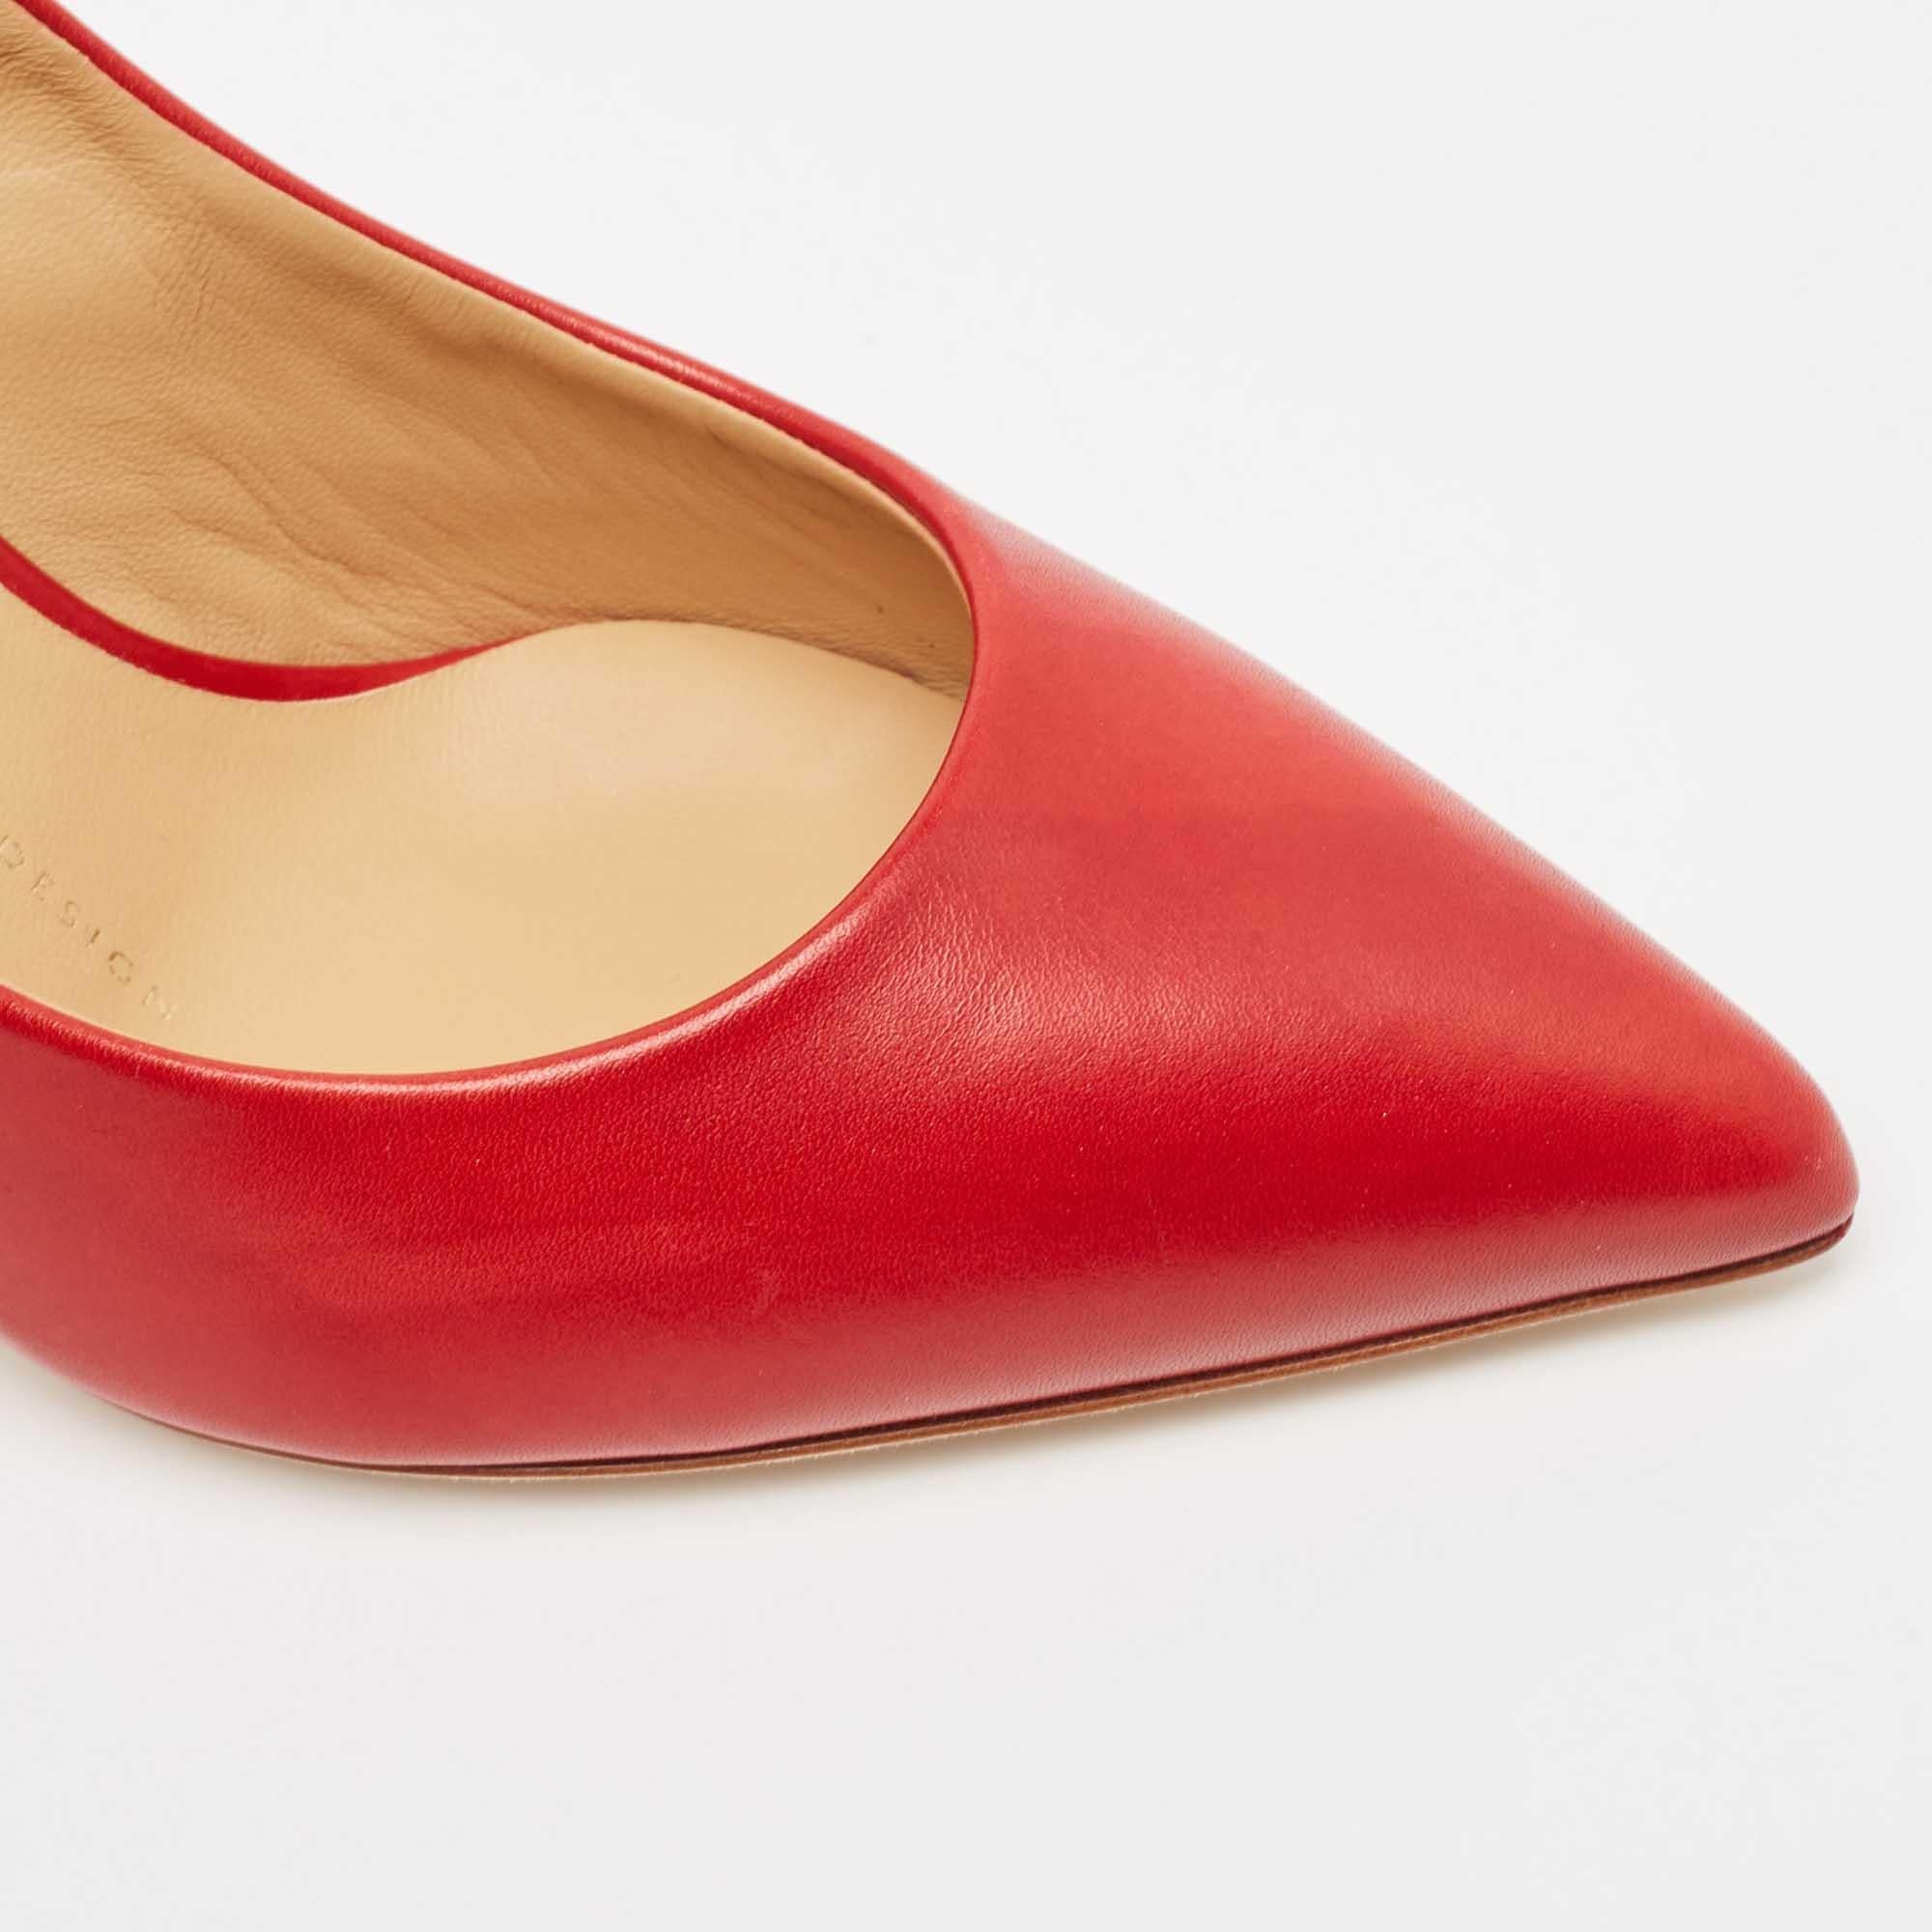 Giuseppe Zanotti Red Leather Pointed Toe Pumps Size 38 1